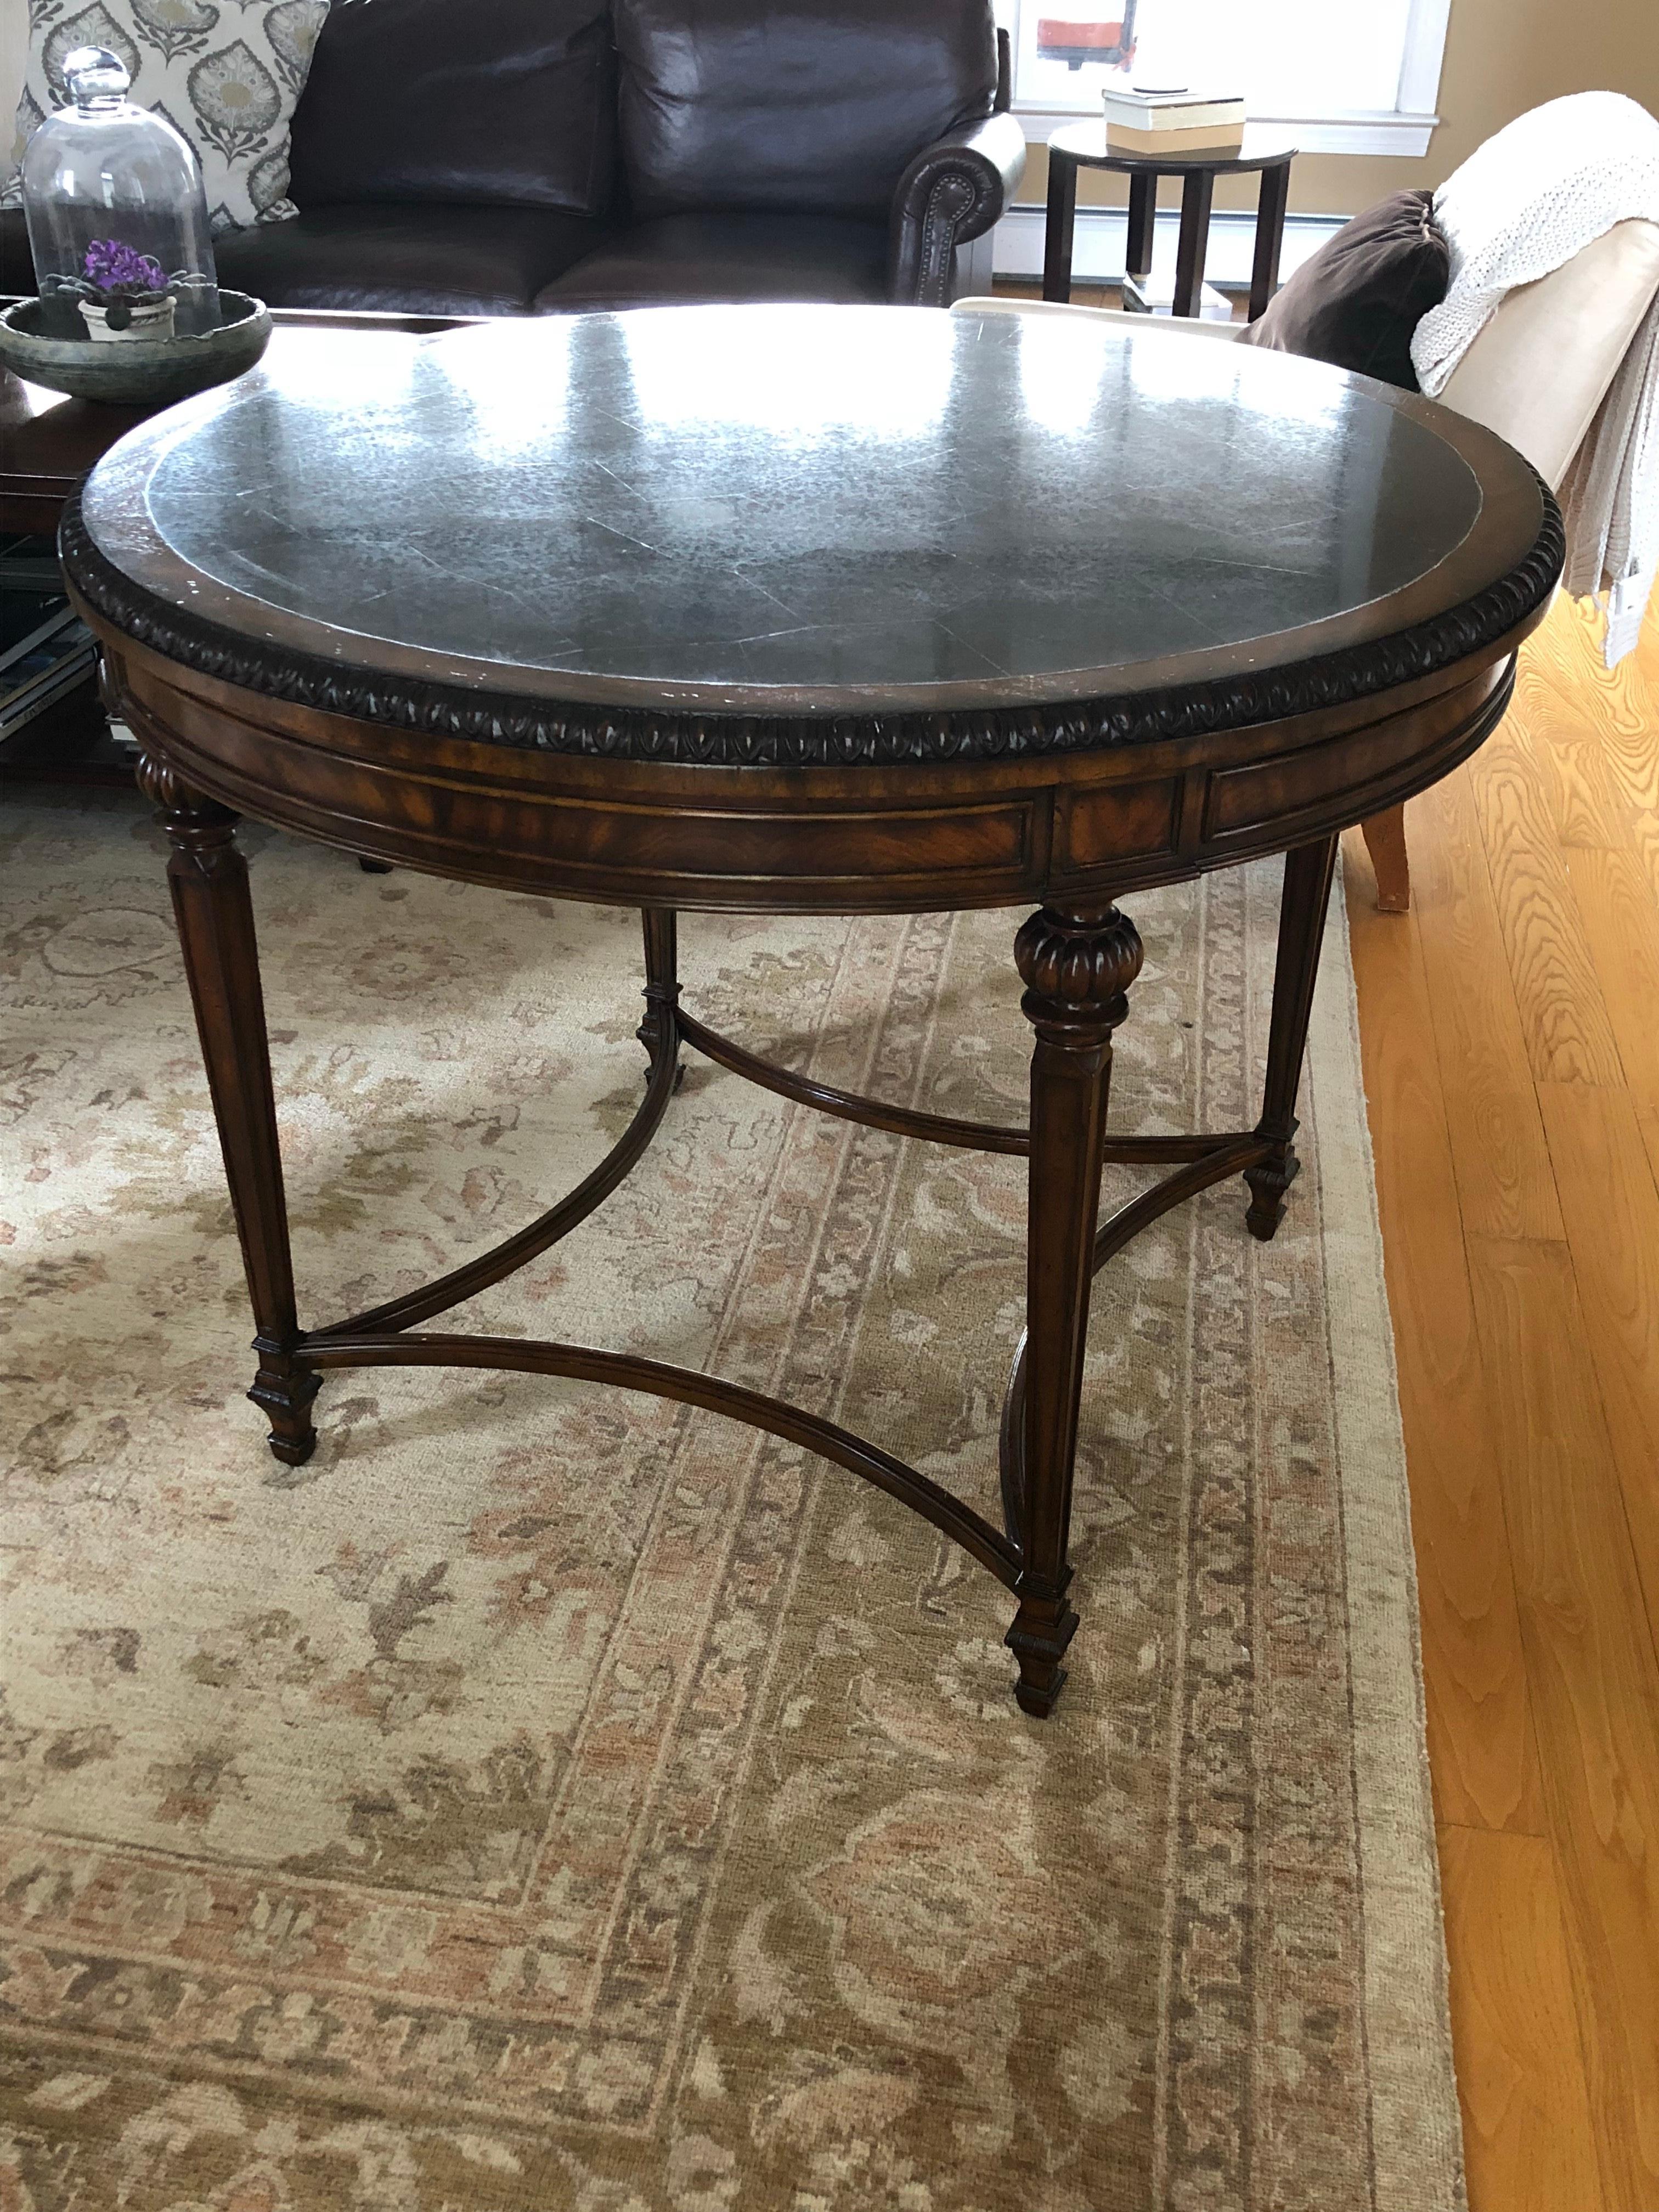 Beautiful round centre hall table or small dining table, having a black granite inlaid stone top with carved wood mahogany base.